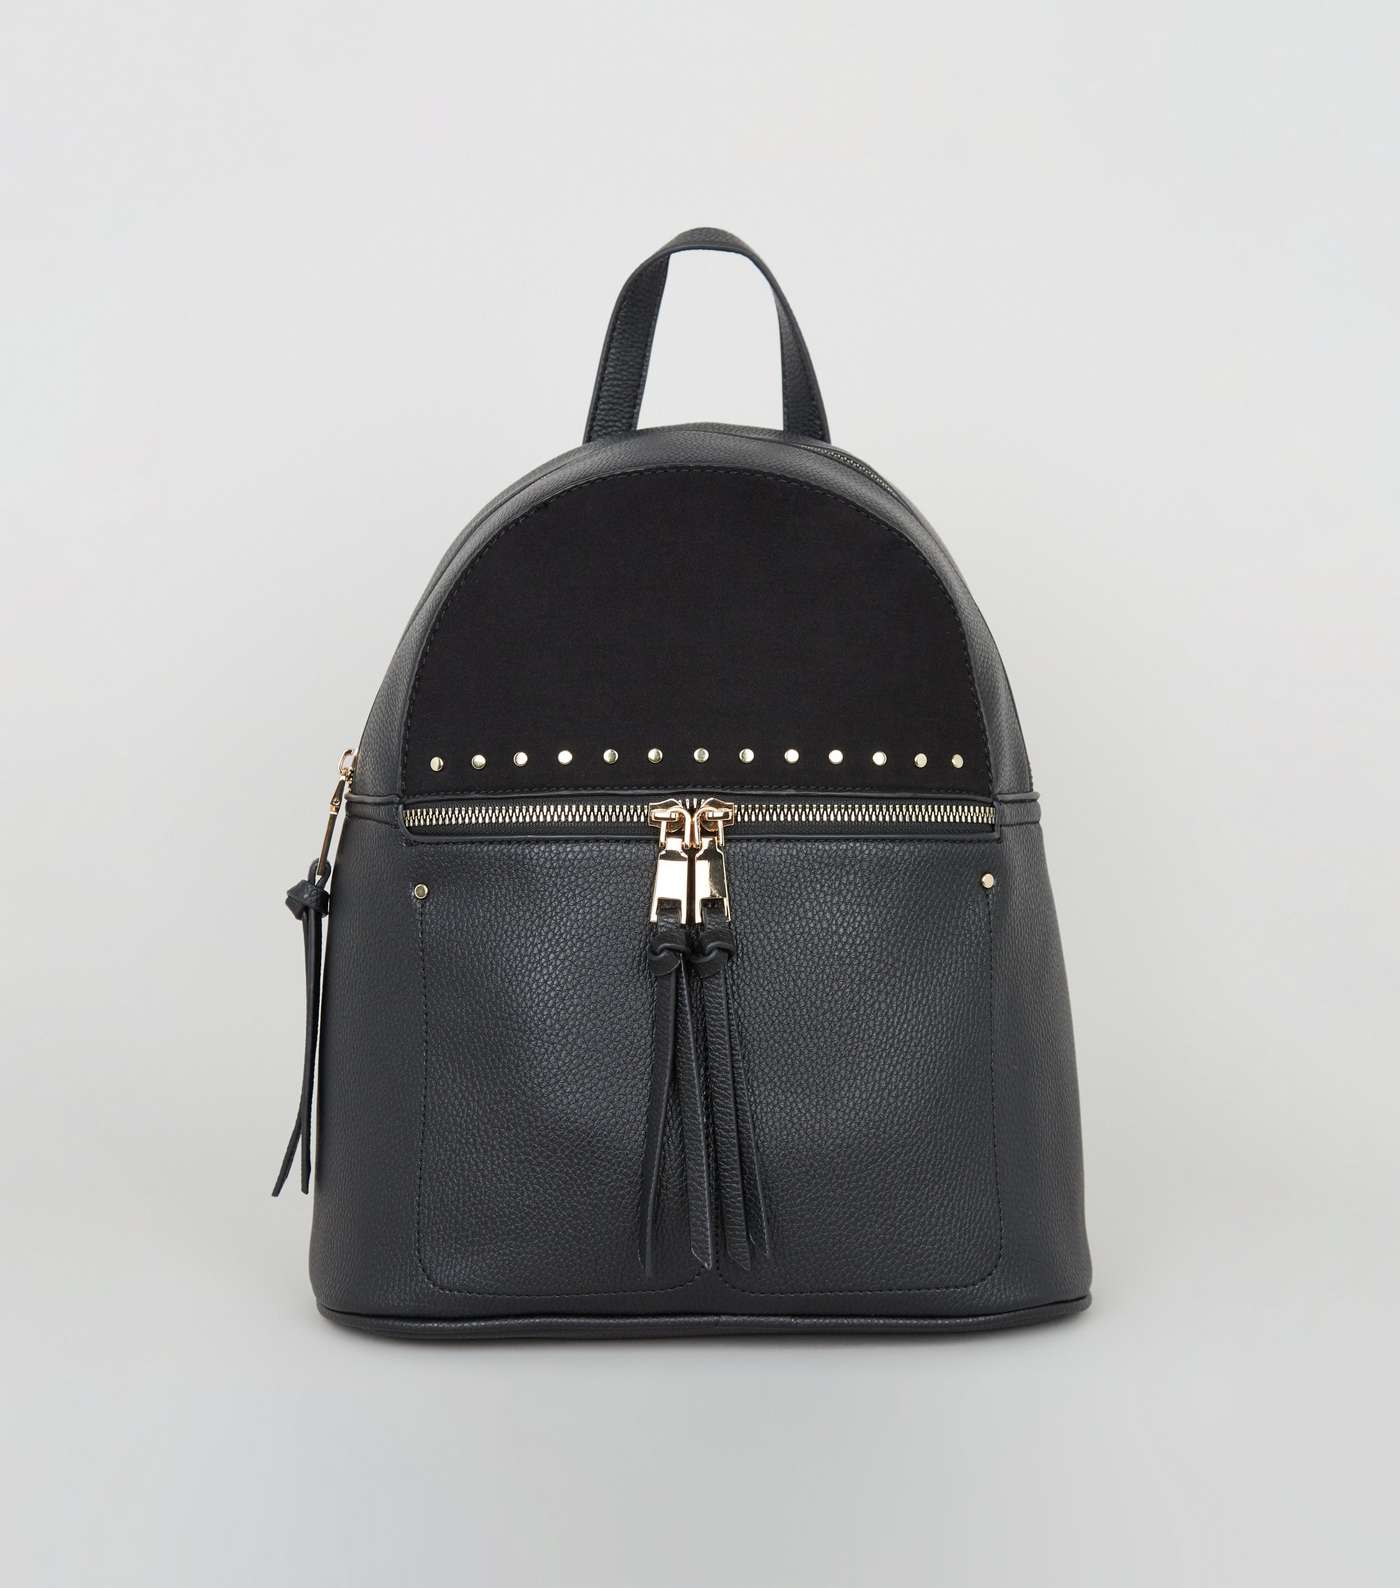 Black Leather-Look Studded Backpack